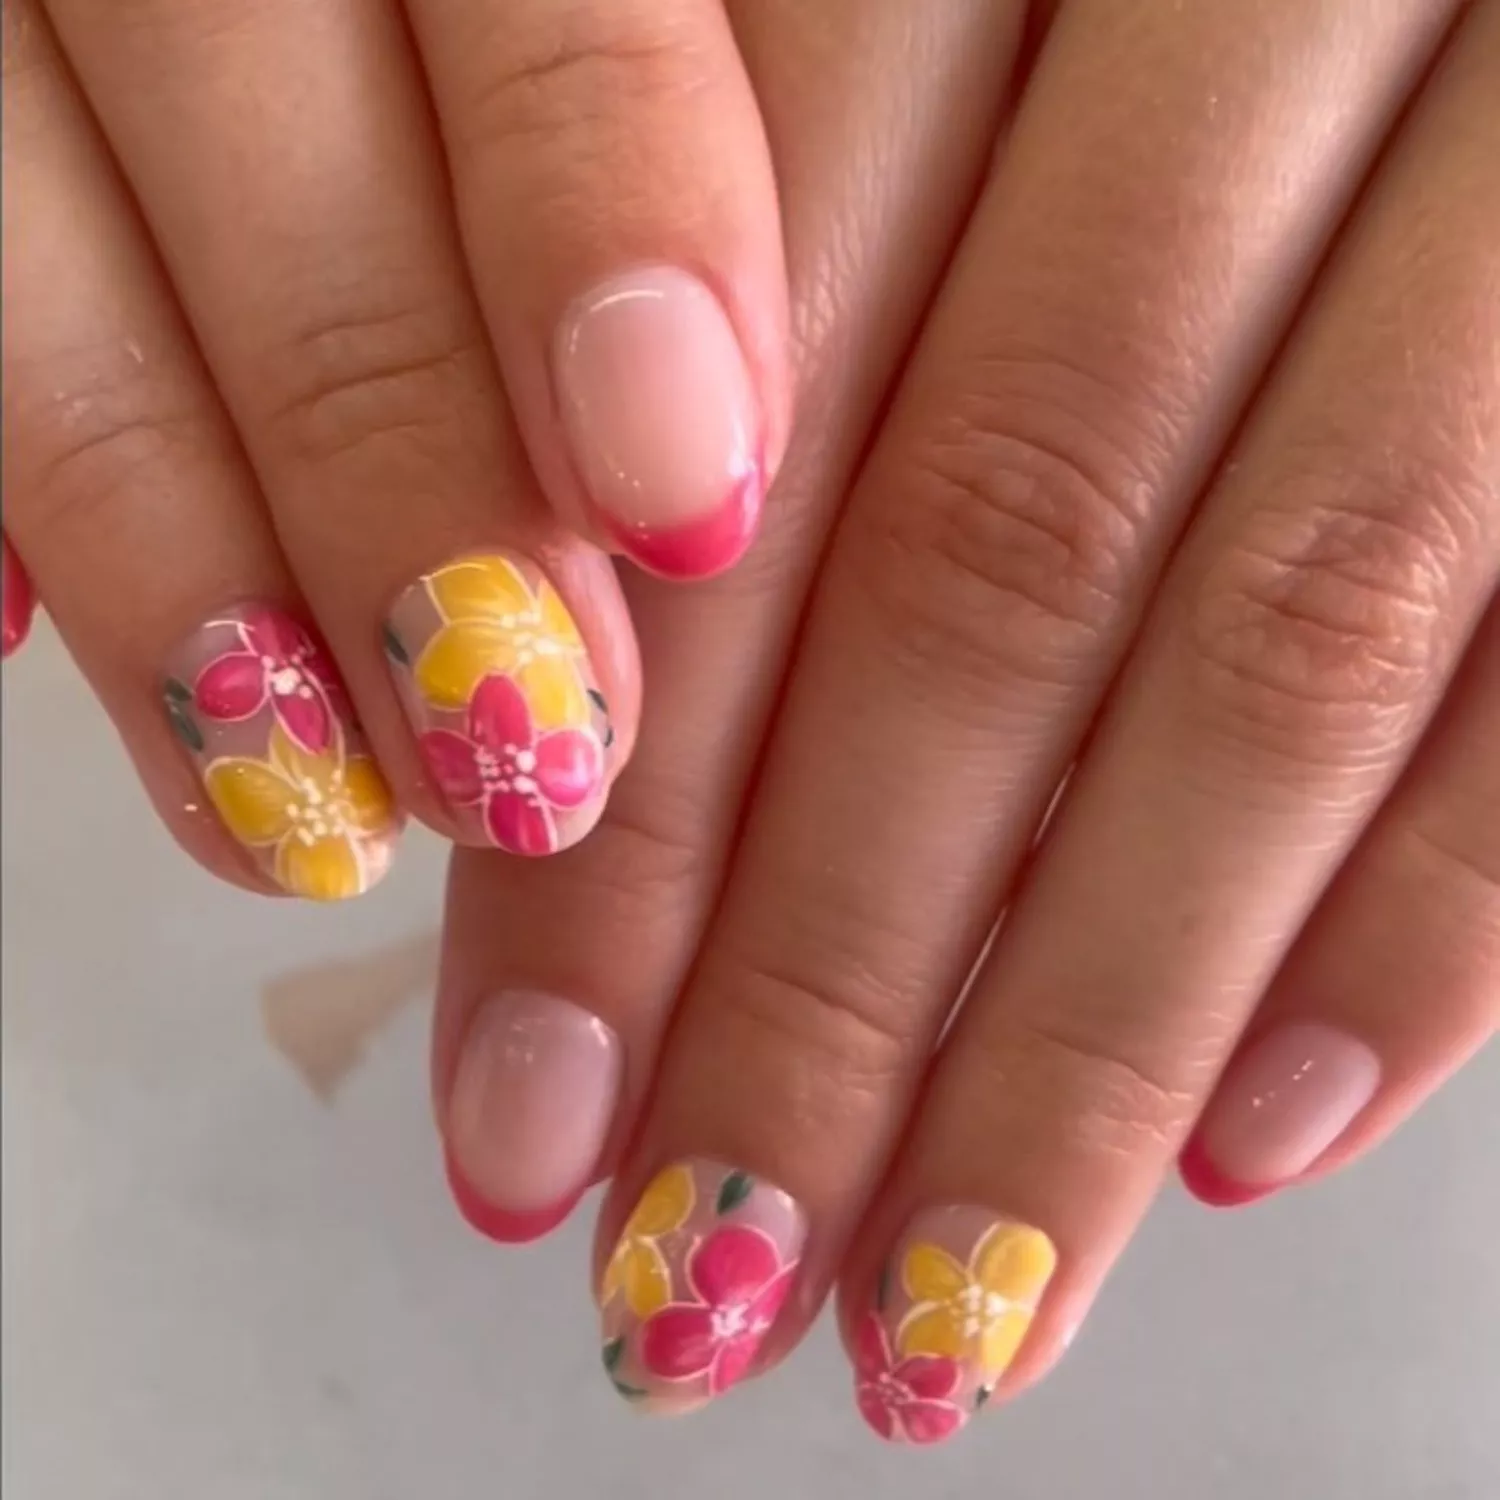 Manicure with pink French tips and pink and yellow floral designs